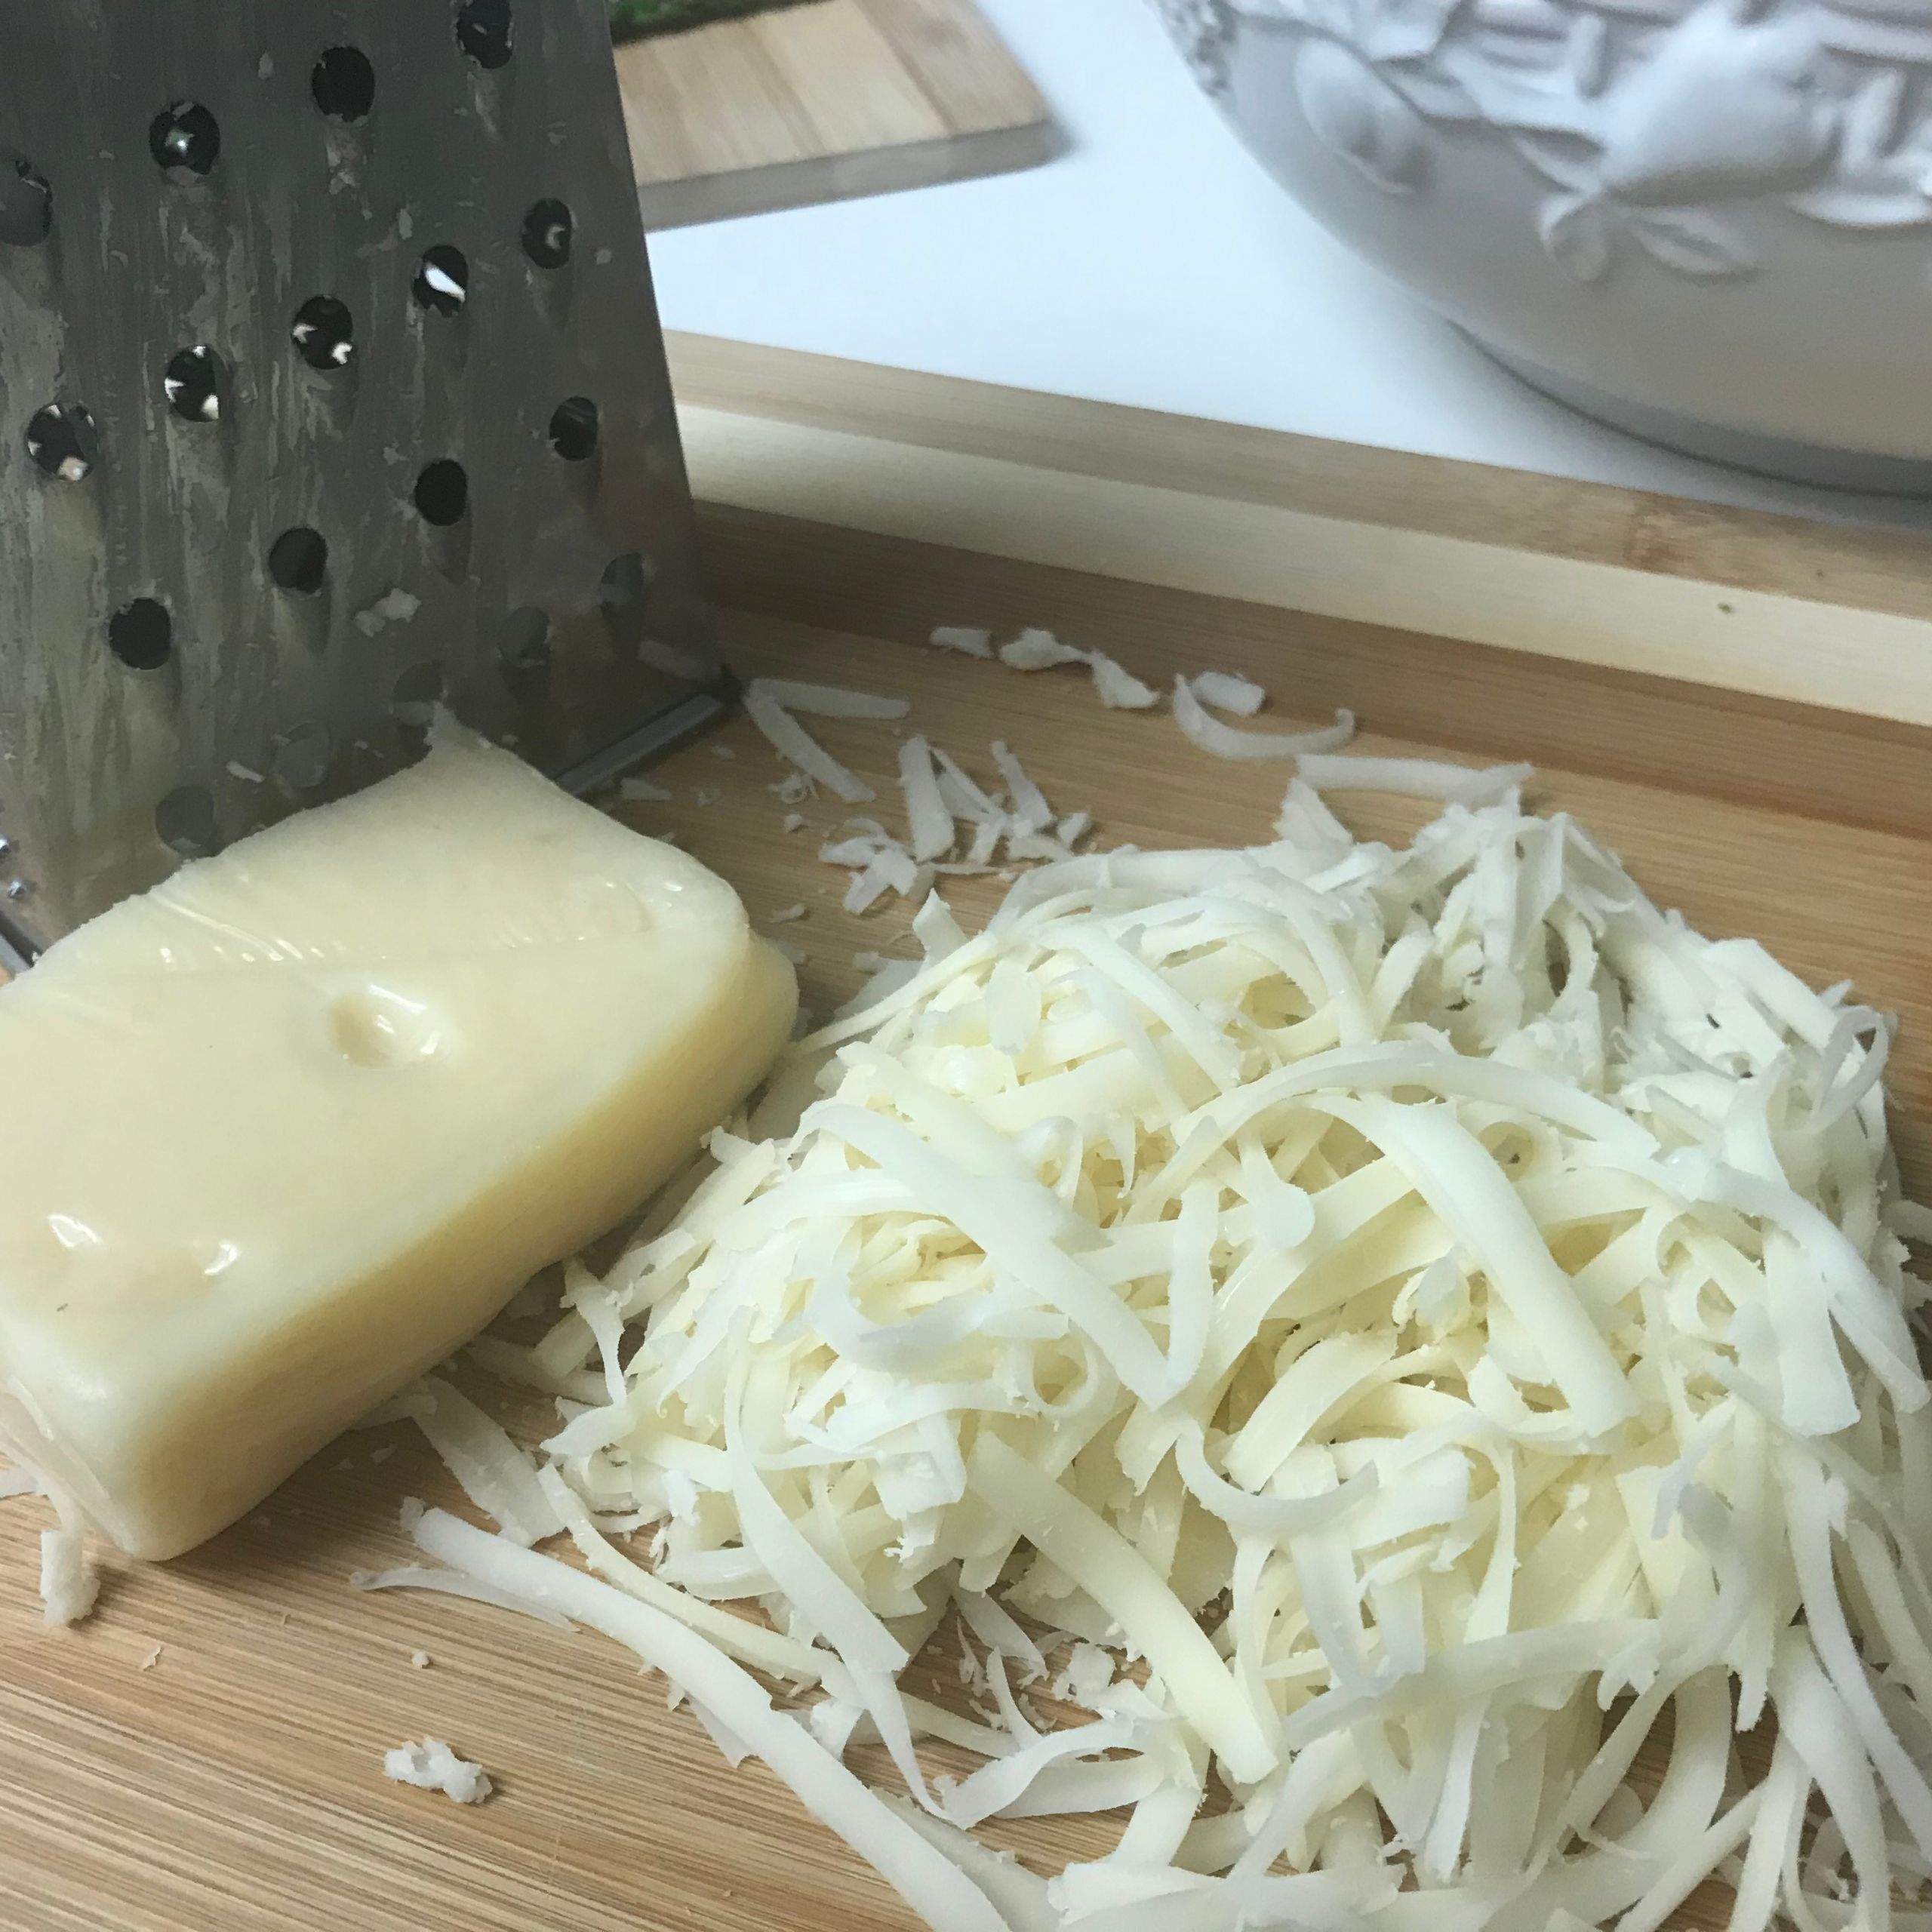 Grating cheese